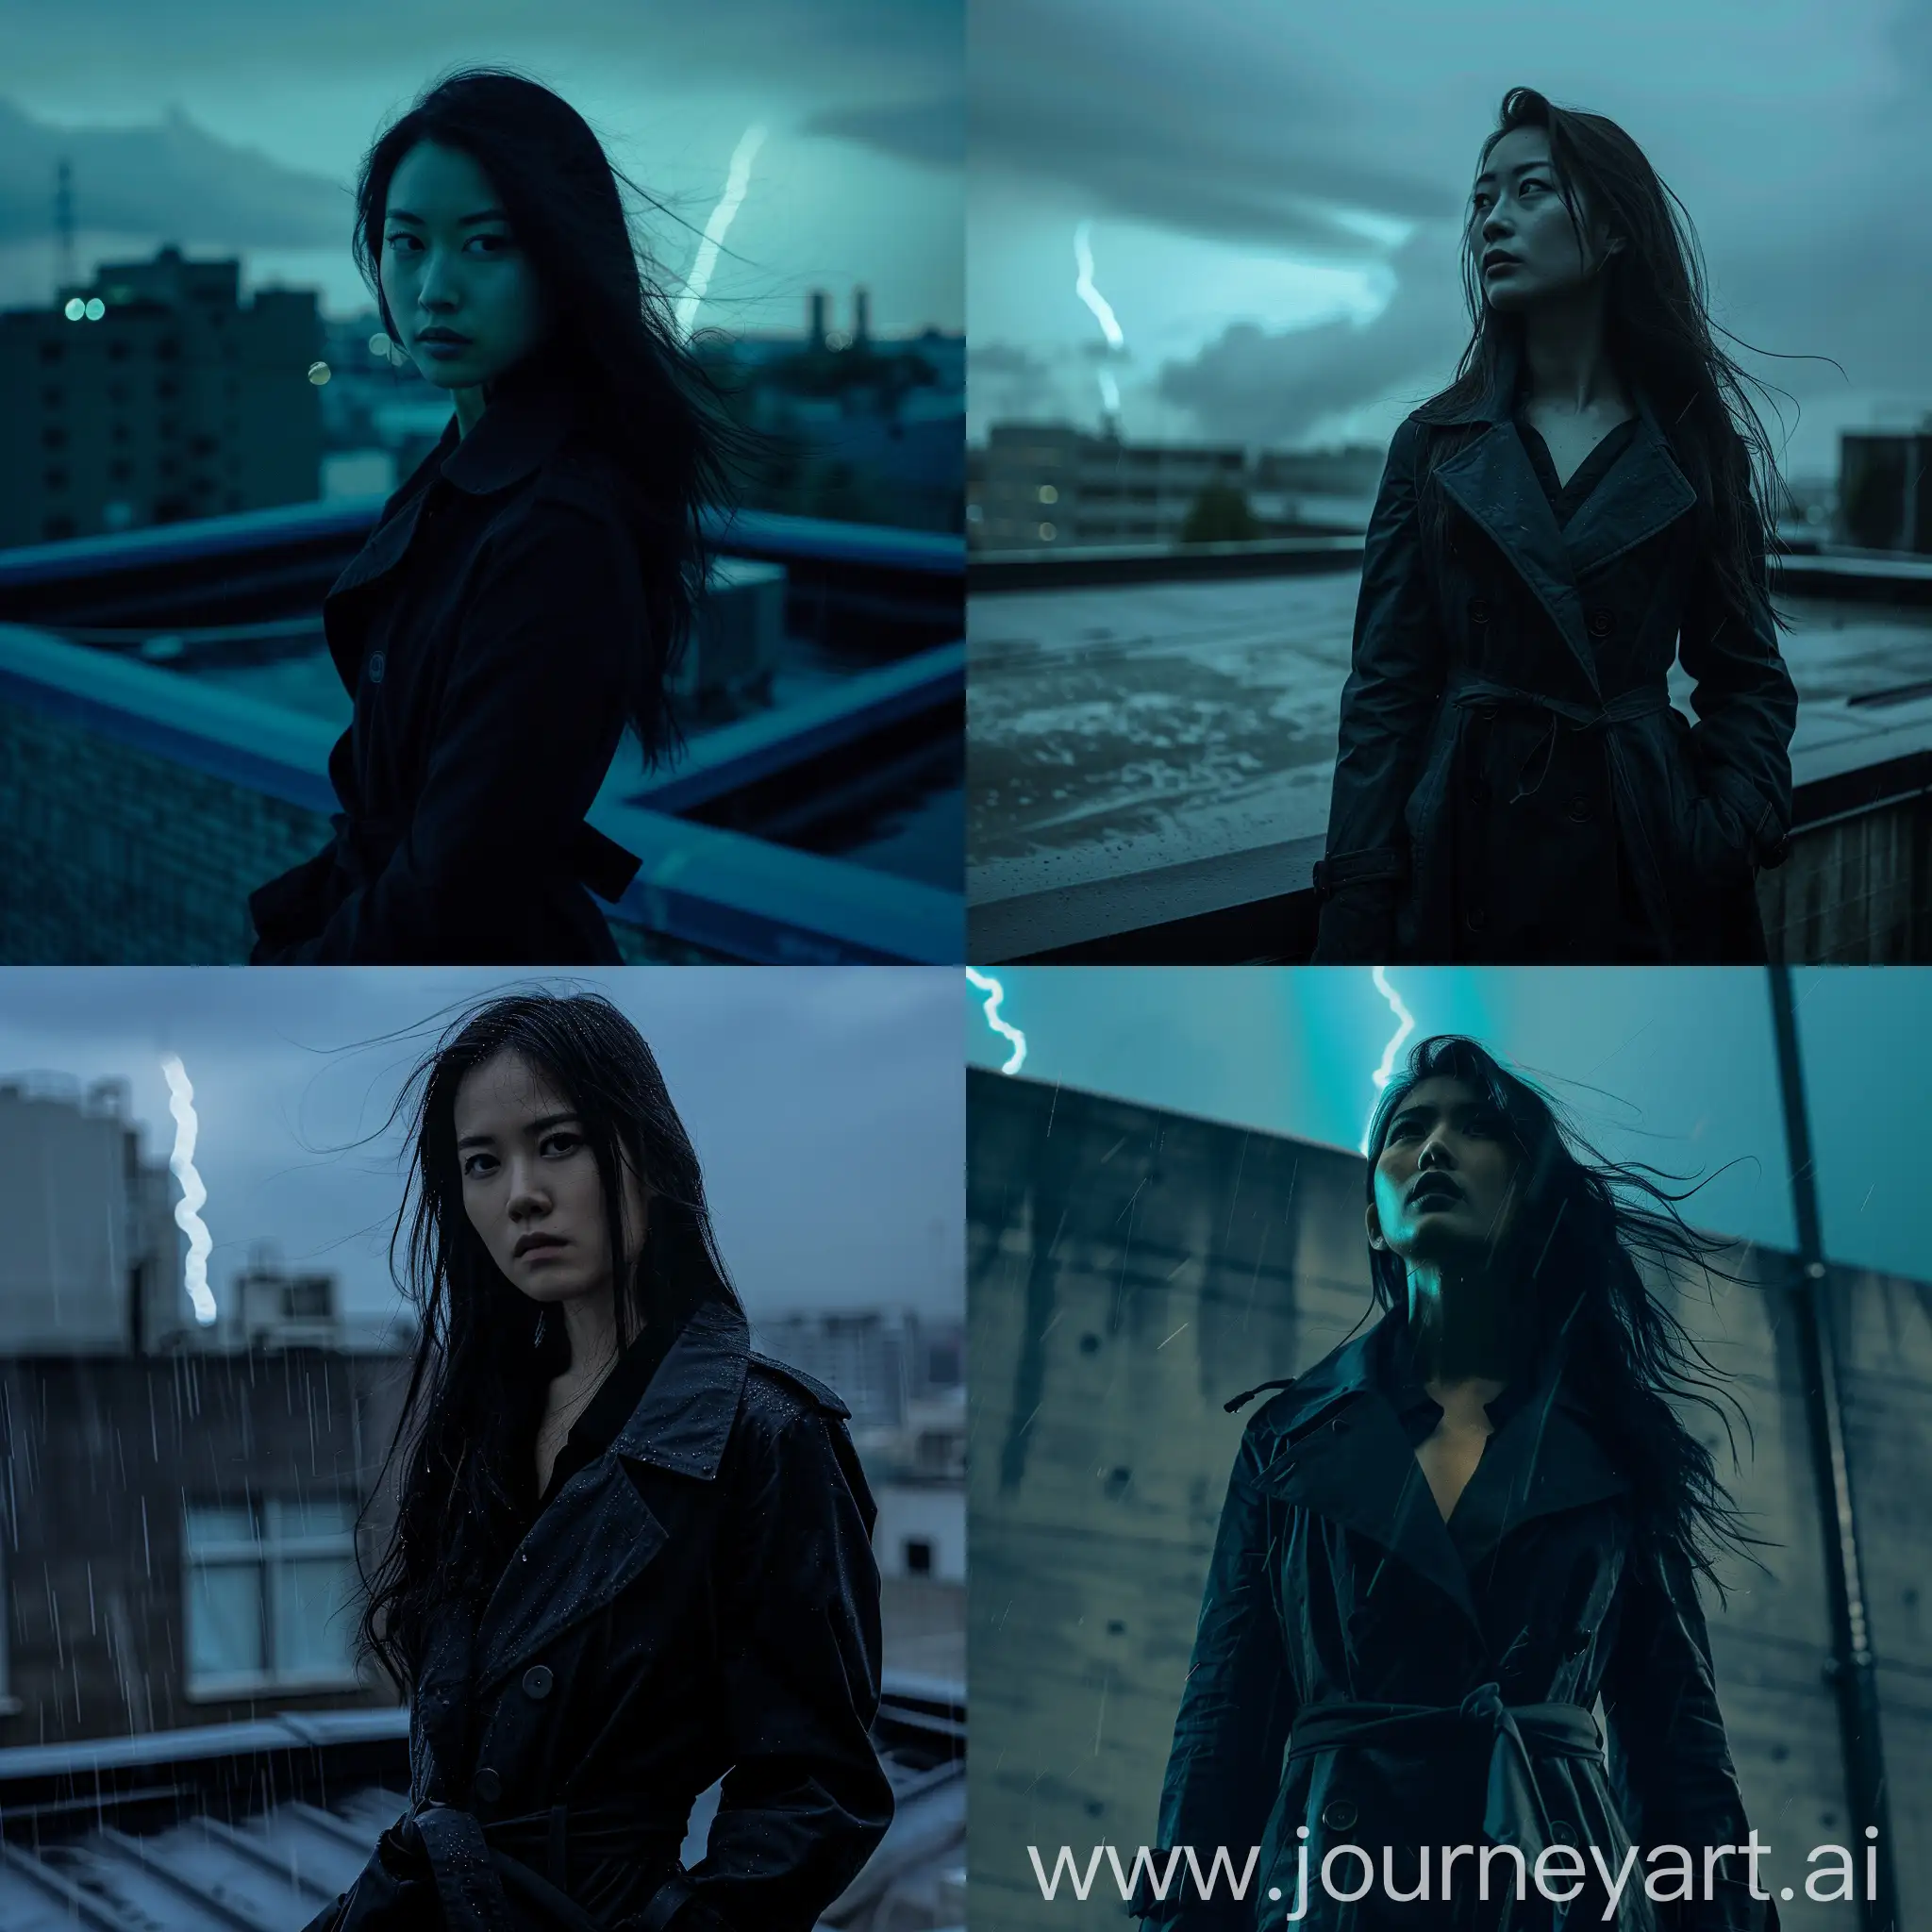 Tilted Angle Shot, High Contrast Monochrome, Cold Blue Coloring, Neo Noir style thriller film, 28yo Asian woman, Rooftop in a rainstorm, Long black trench coat, Stormy with lightning


